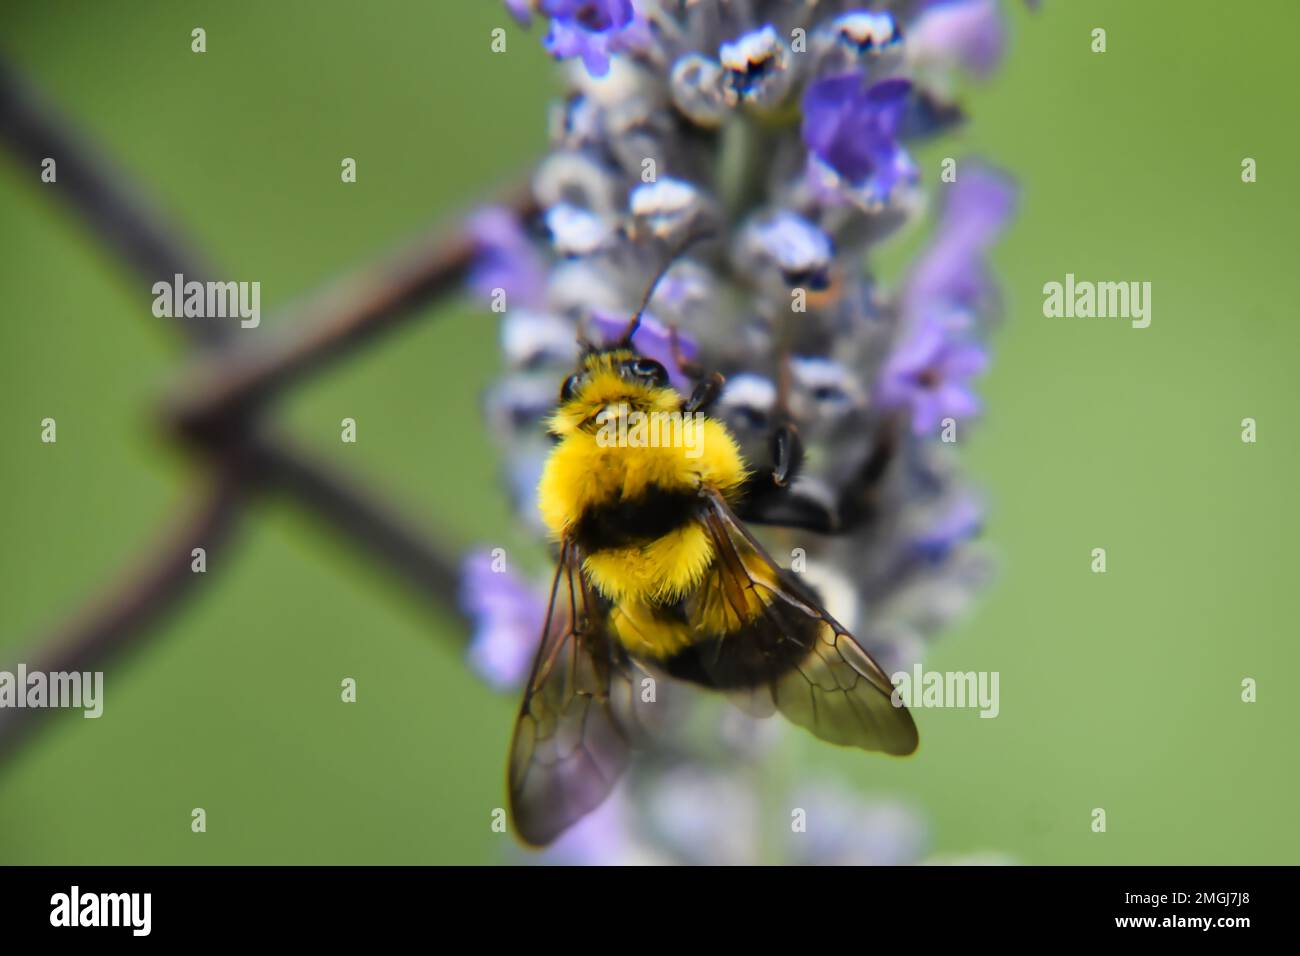 A closeup of bee sipping nectar from purple flower Stock Photo